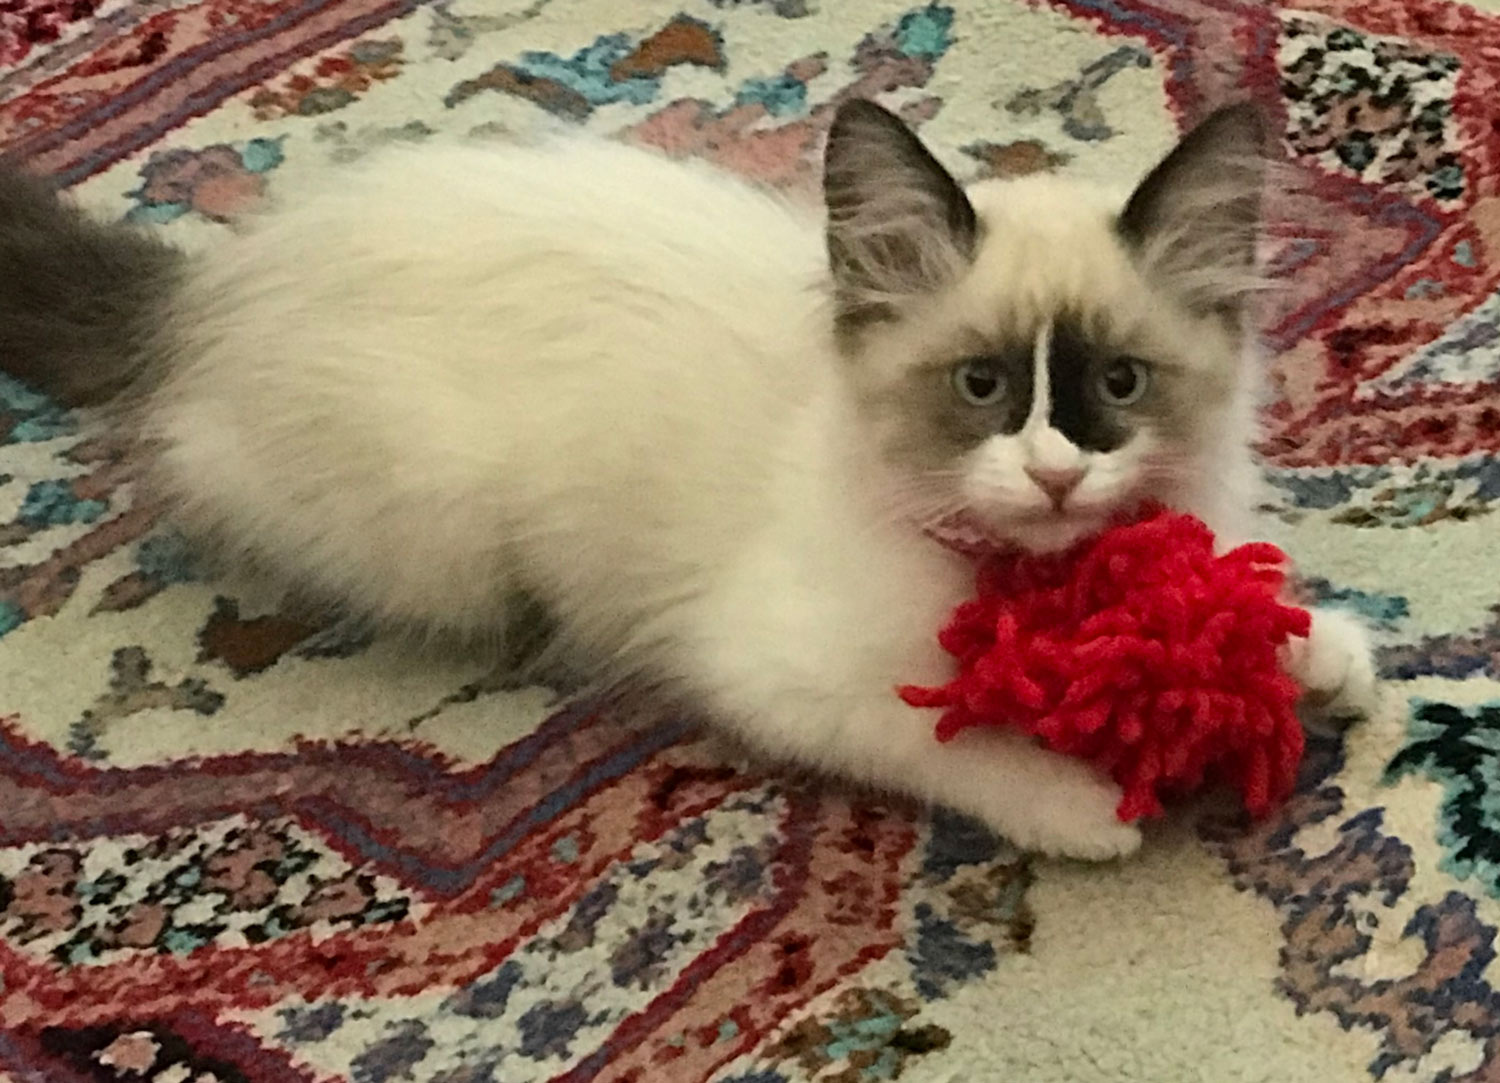 Trina S. shared a picture of her kitten “Smudgie“, adopted from Animal Care Services in Long Beach, California. Smudgie loves her red yarn toy